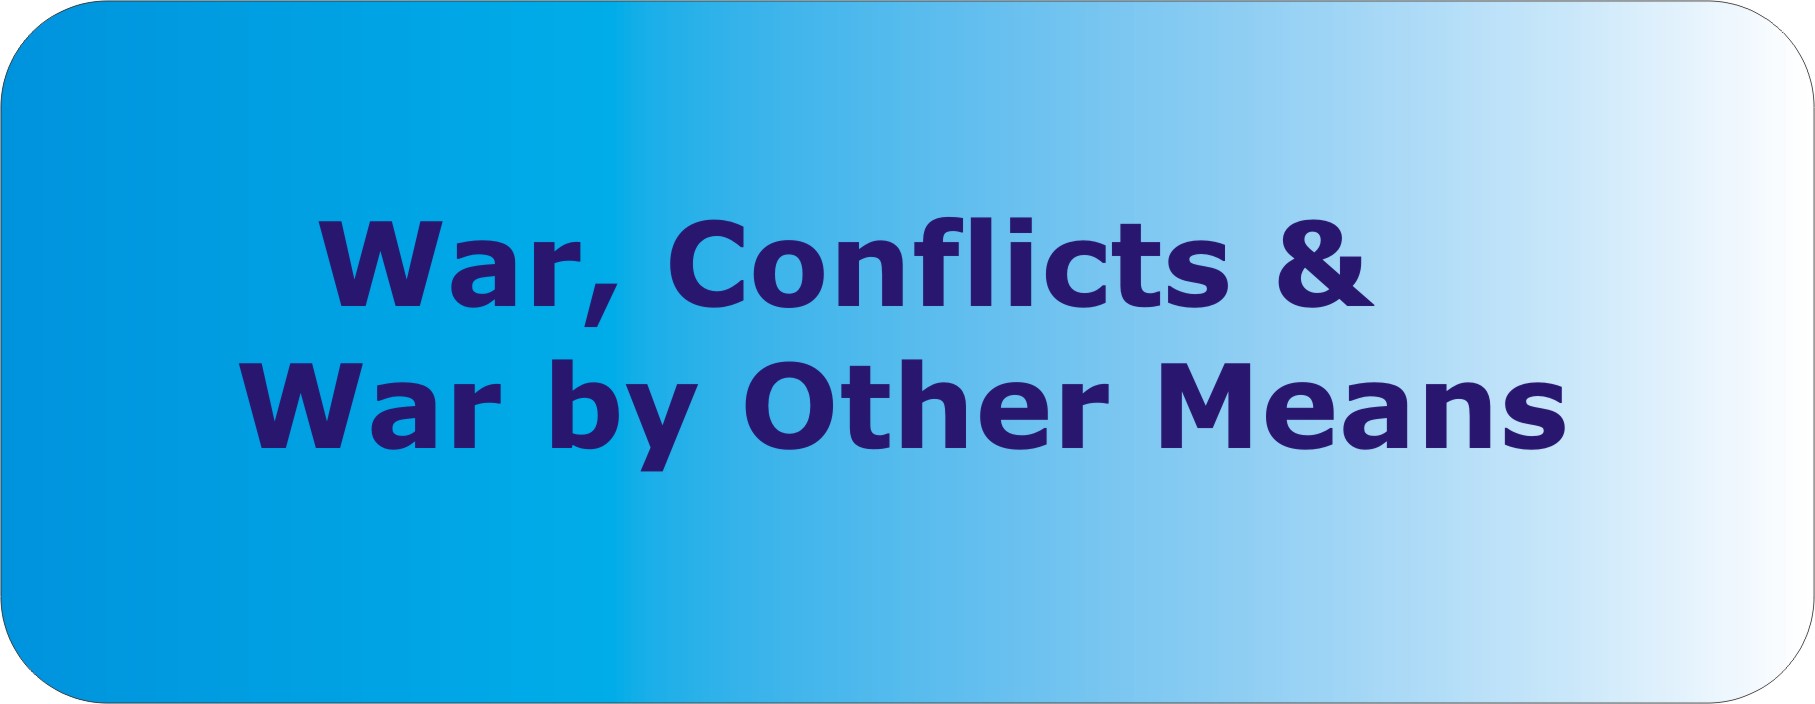 War, Conflicts and War by Other Means